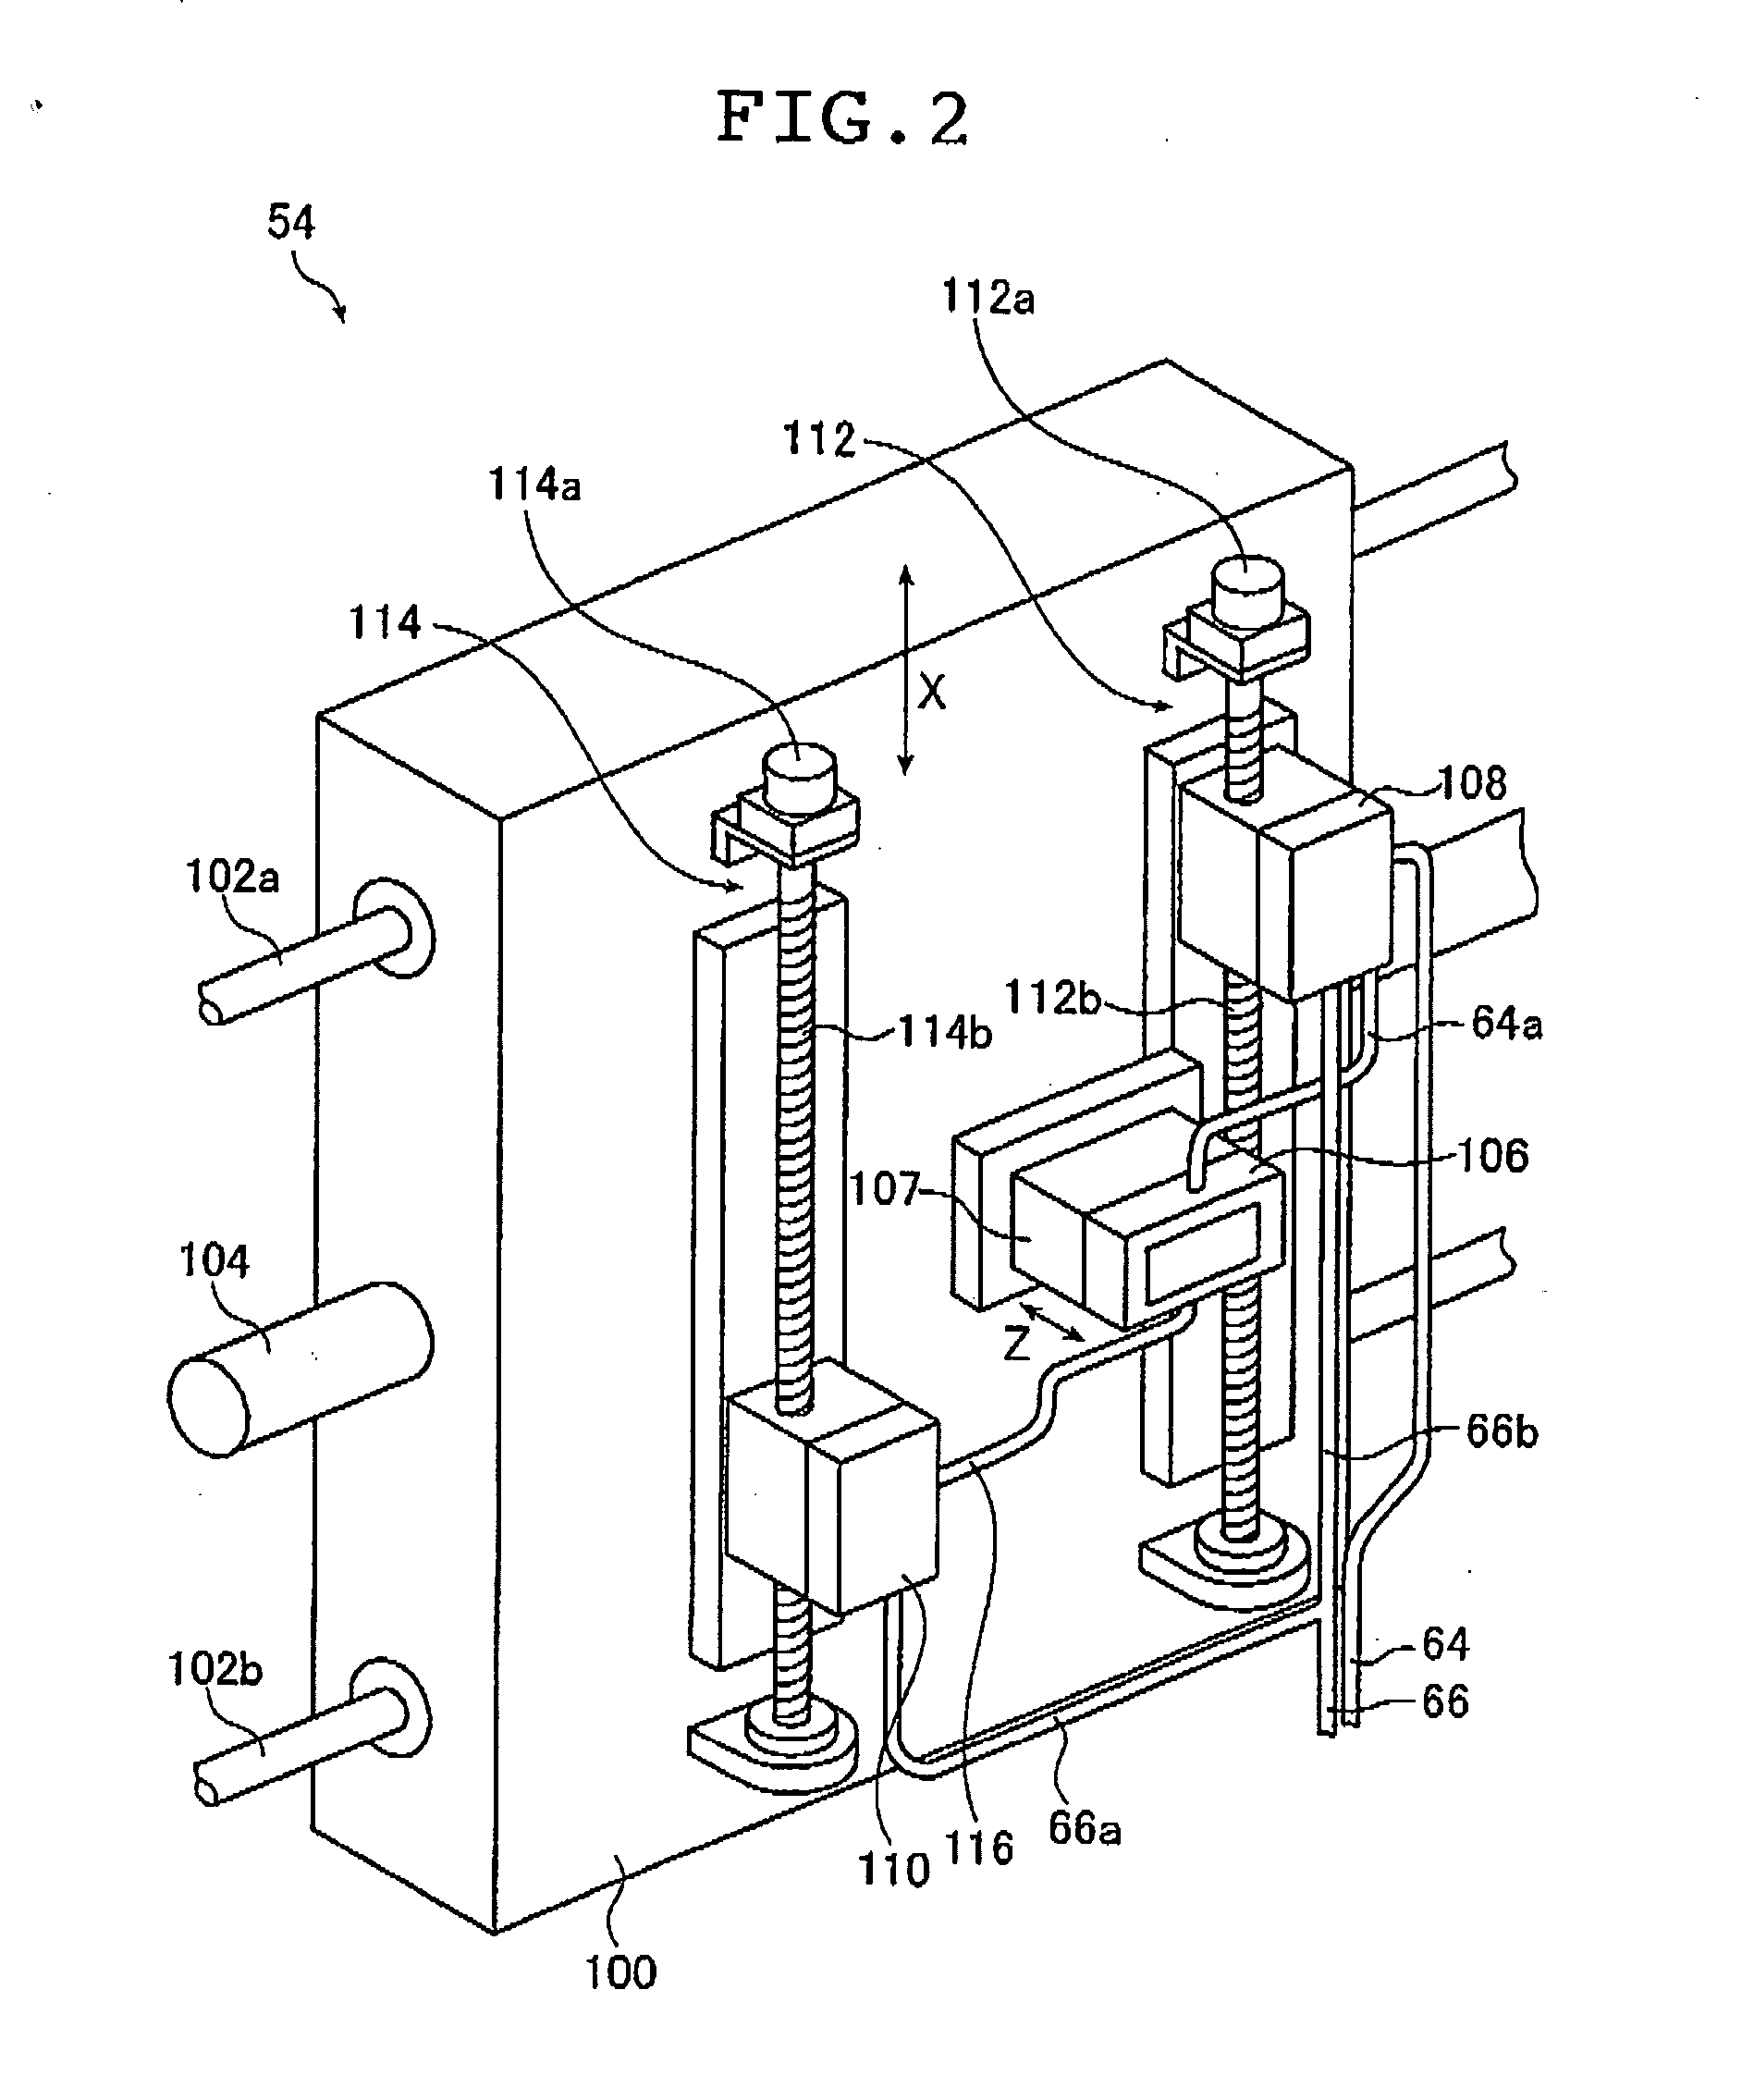 Ink jet recording apparatus and method of controlling the same